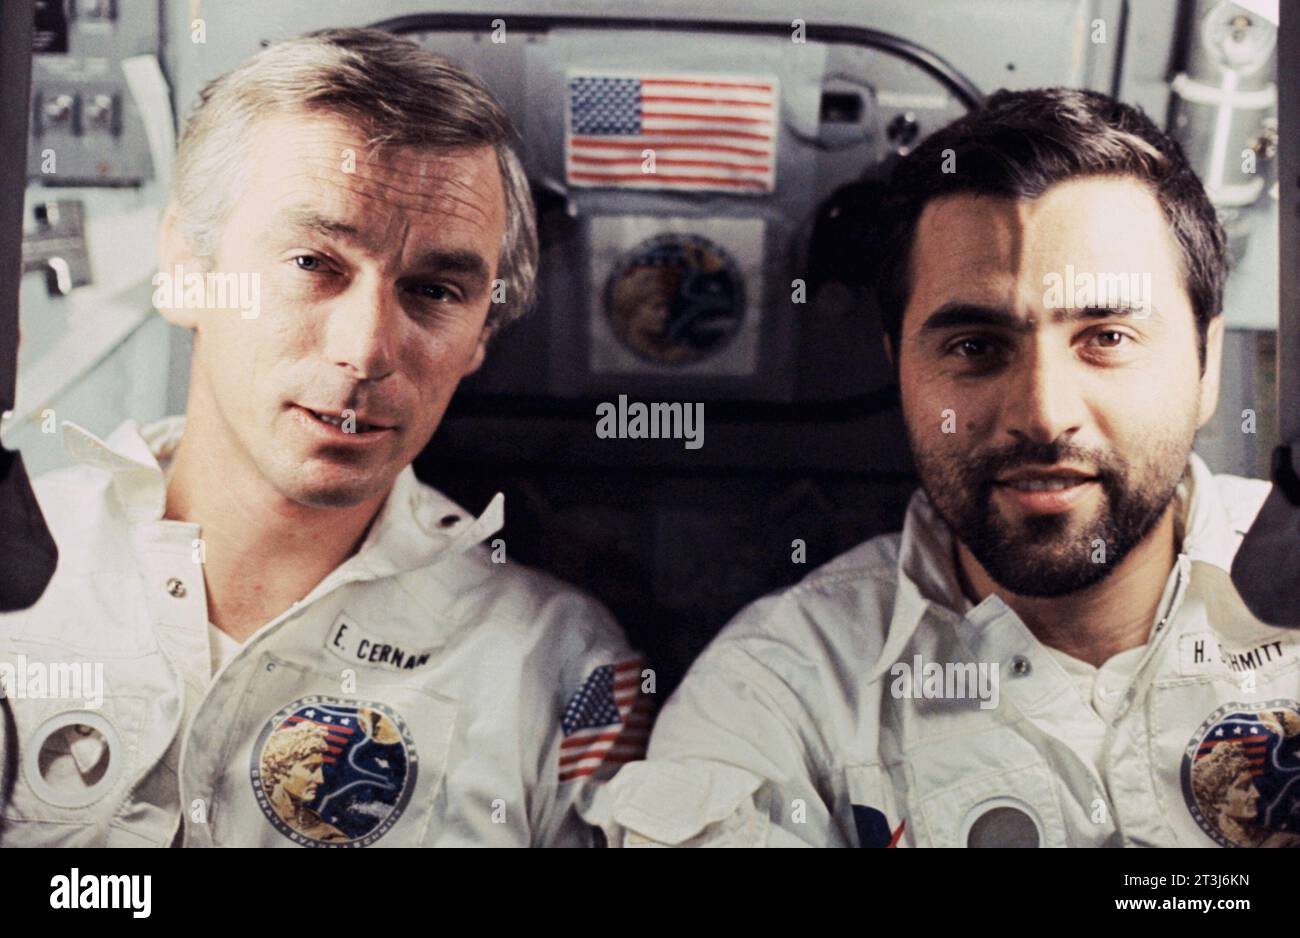 Cernan and Schmitt, Astronaut Eugene A. Cernan (left) and scientist-astronaut Harrison H. 'Jack' Schmitt are photographed by the third crew man aboard the Apollo 17 spacecraft during the final lunar landing mission in NASA's Apollo program. Stock Photo